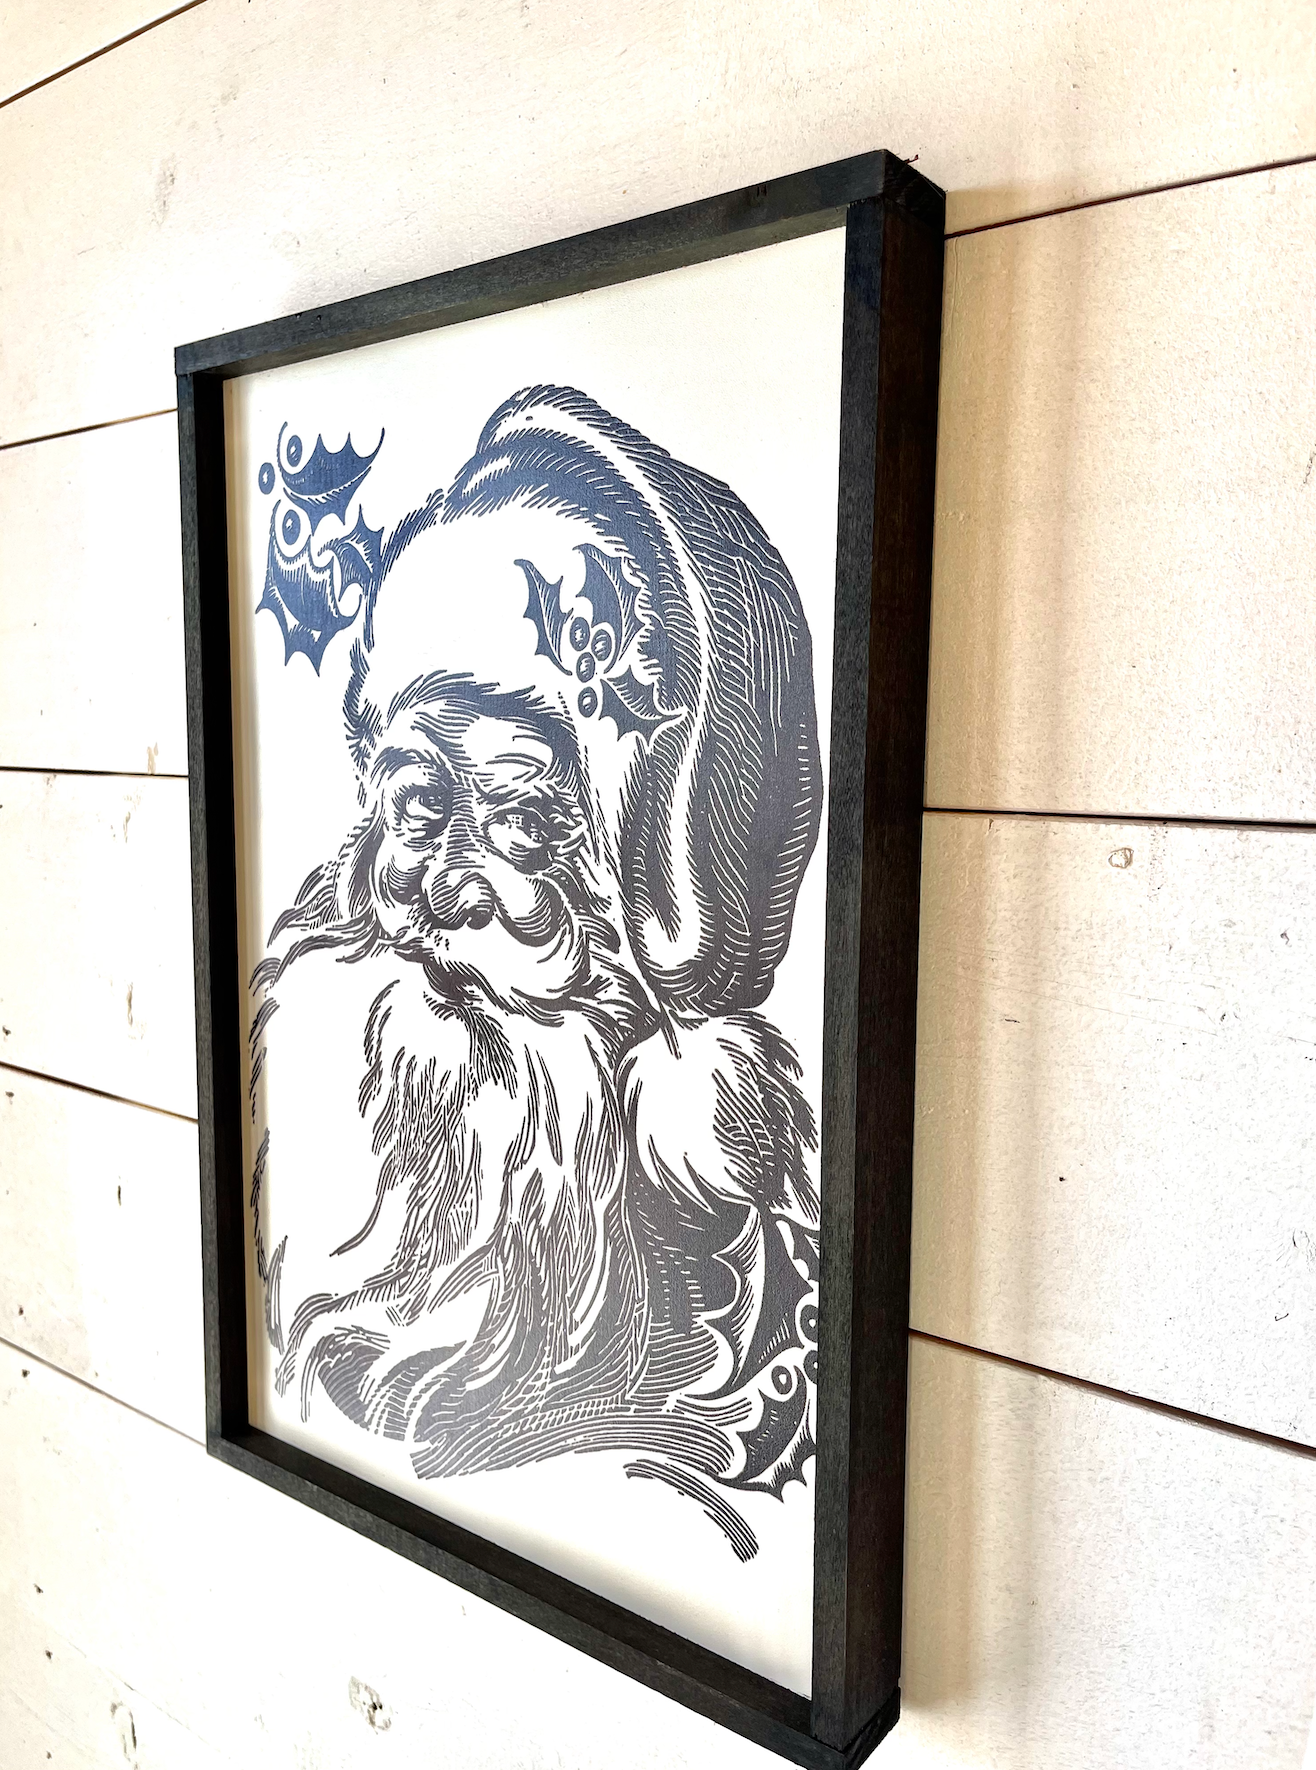 Traditional black and white santa claus christmas wood sign